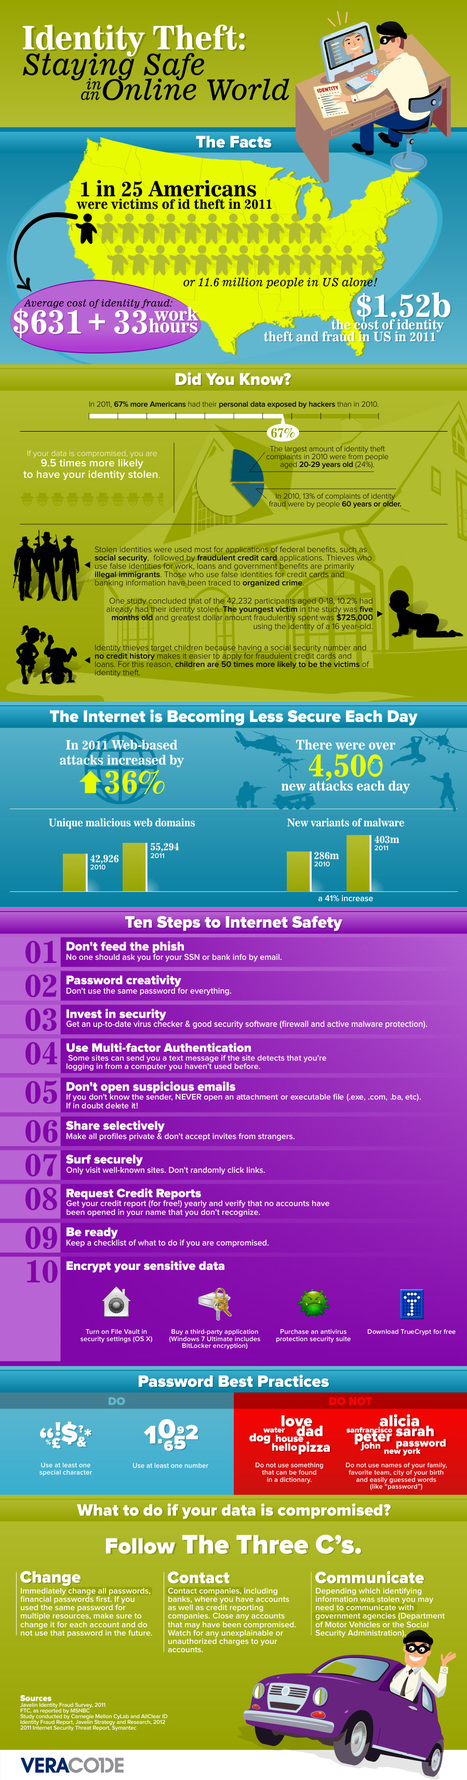 Identity Theft: Keeping Safe in an Online World [Infographic] | Web 2.0 for juandoming | Scoop.it